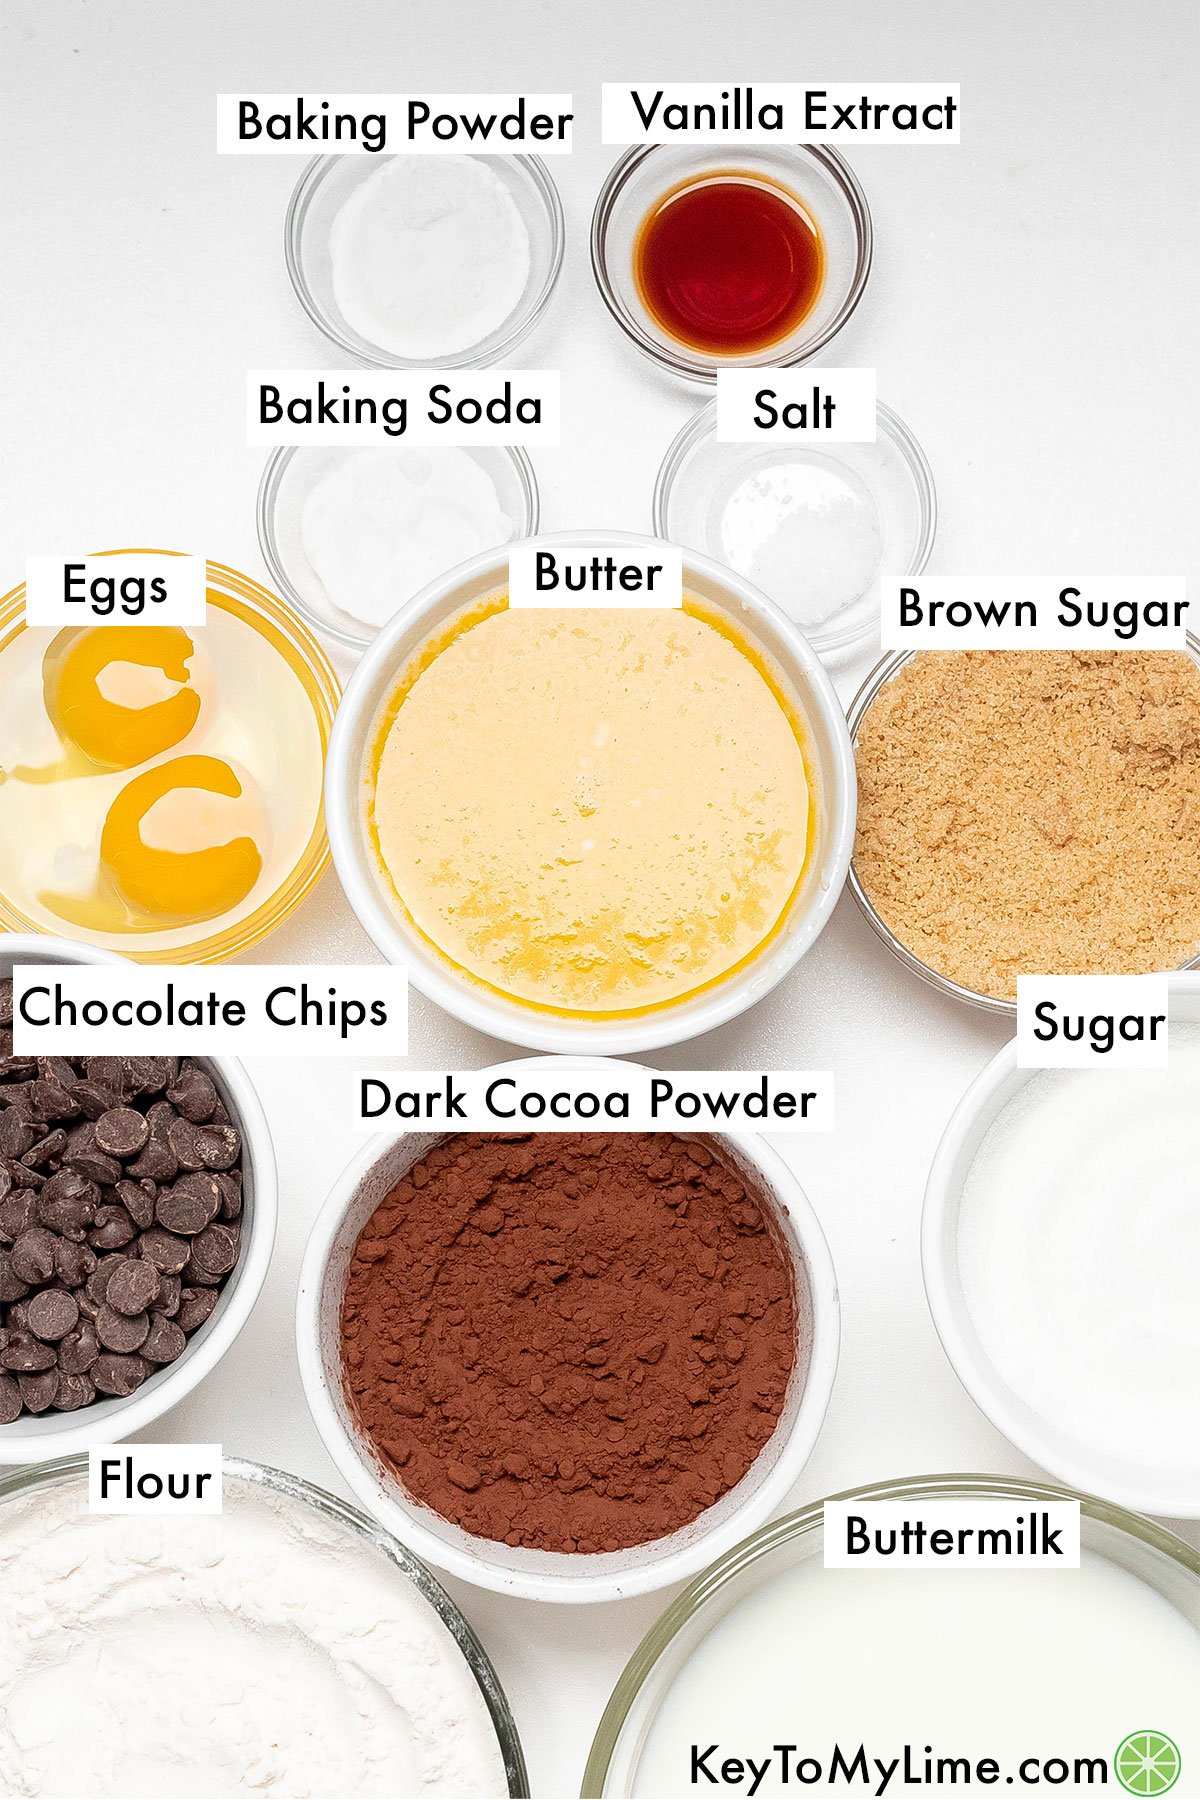 The labeled ingredients for chocolate bread.